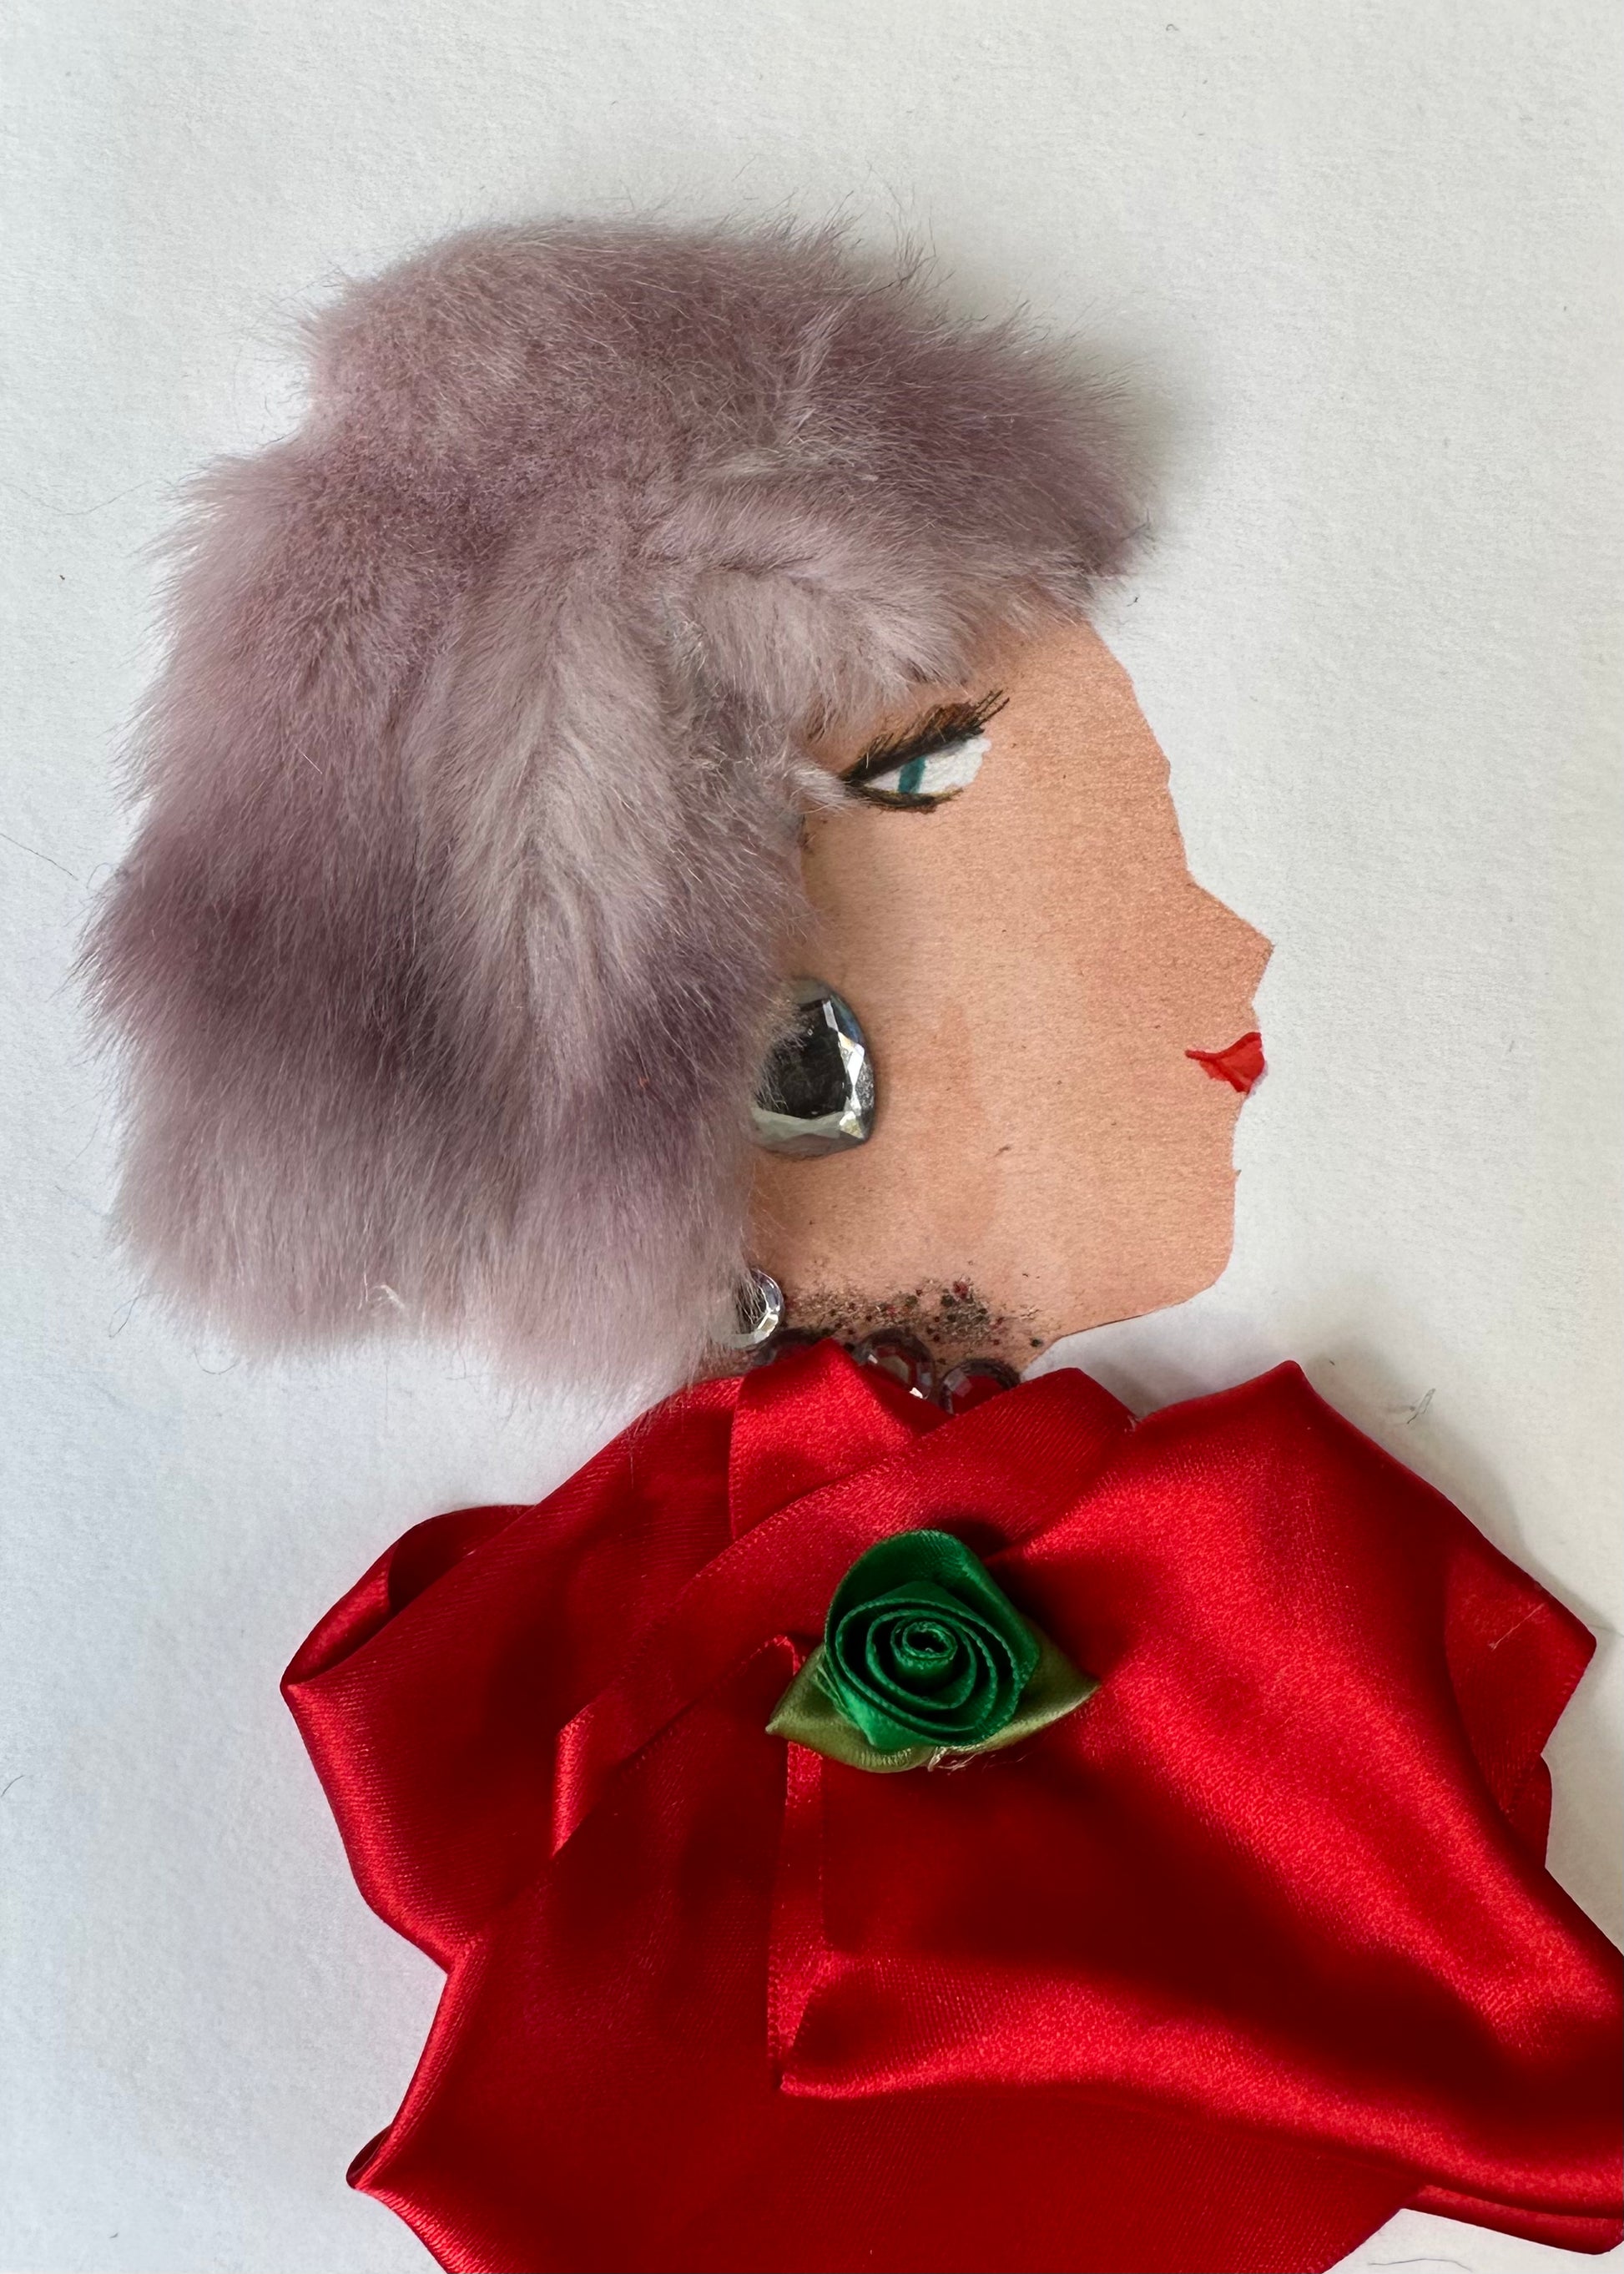 I designed this handmade card of woman dressed in a red, silk-like blouse with an emerald green flower in the center. She has a soft purple coloured hair and silver heart-shaped earrings.